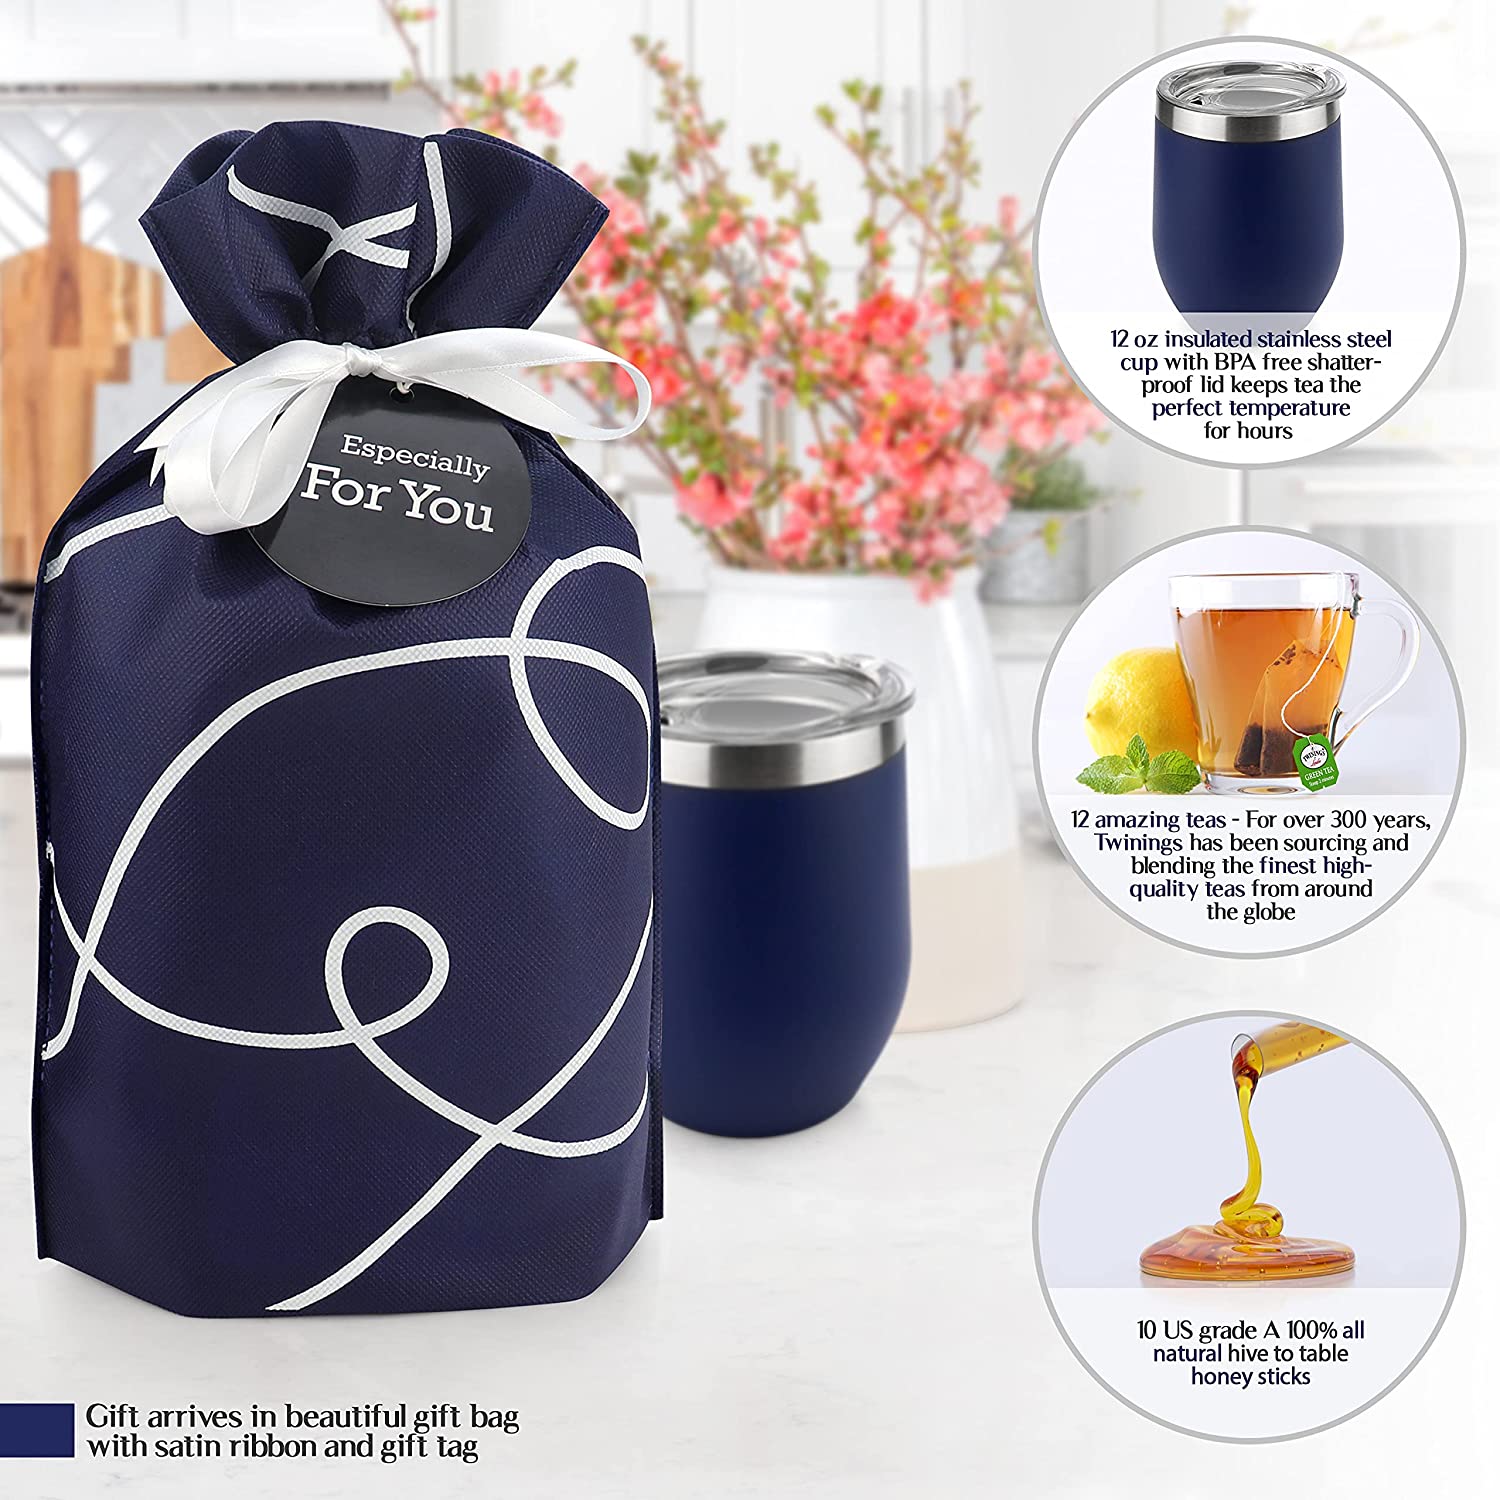 https://bigbigmart.com/wp-content/uploads/2022/03/Tea-Gift-Set-for-Tea-Lovers-Includes-Double-Insulated-Tea-Cup-12-Uniquely-Blended-Teas1.jpg